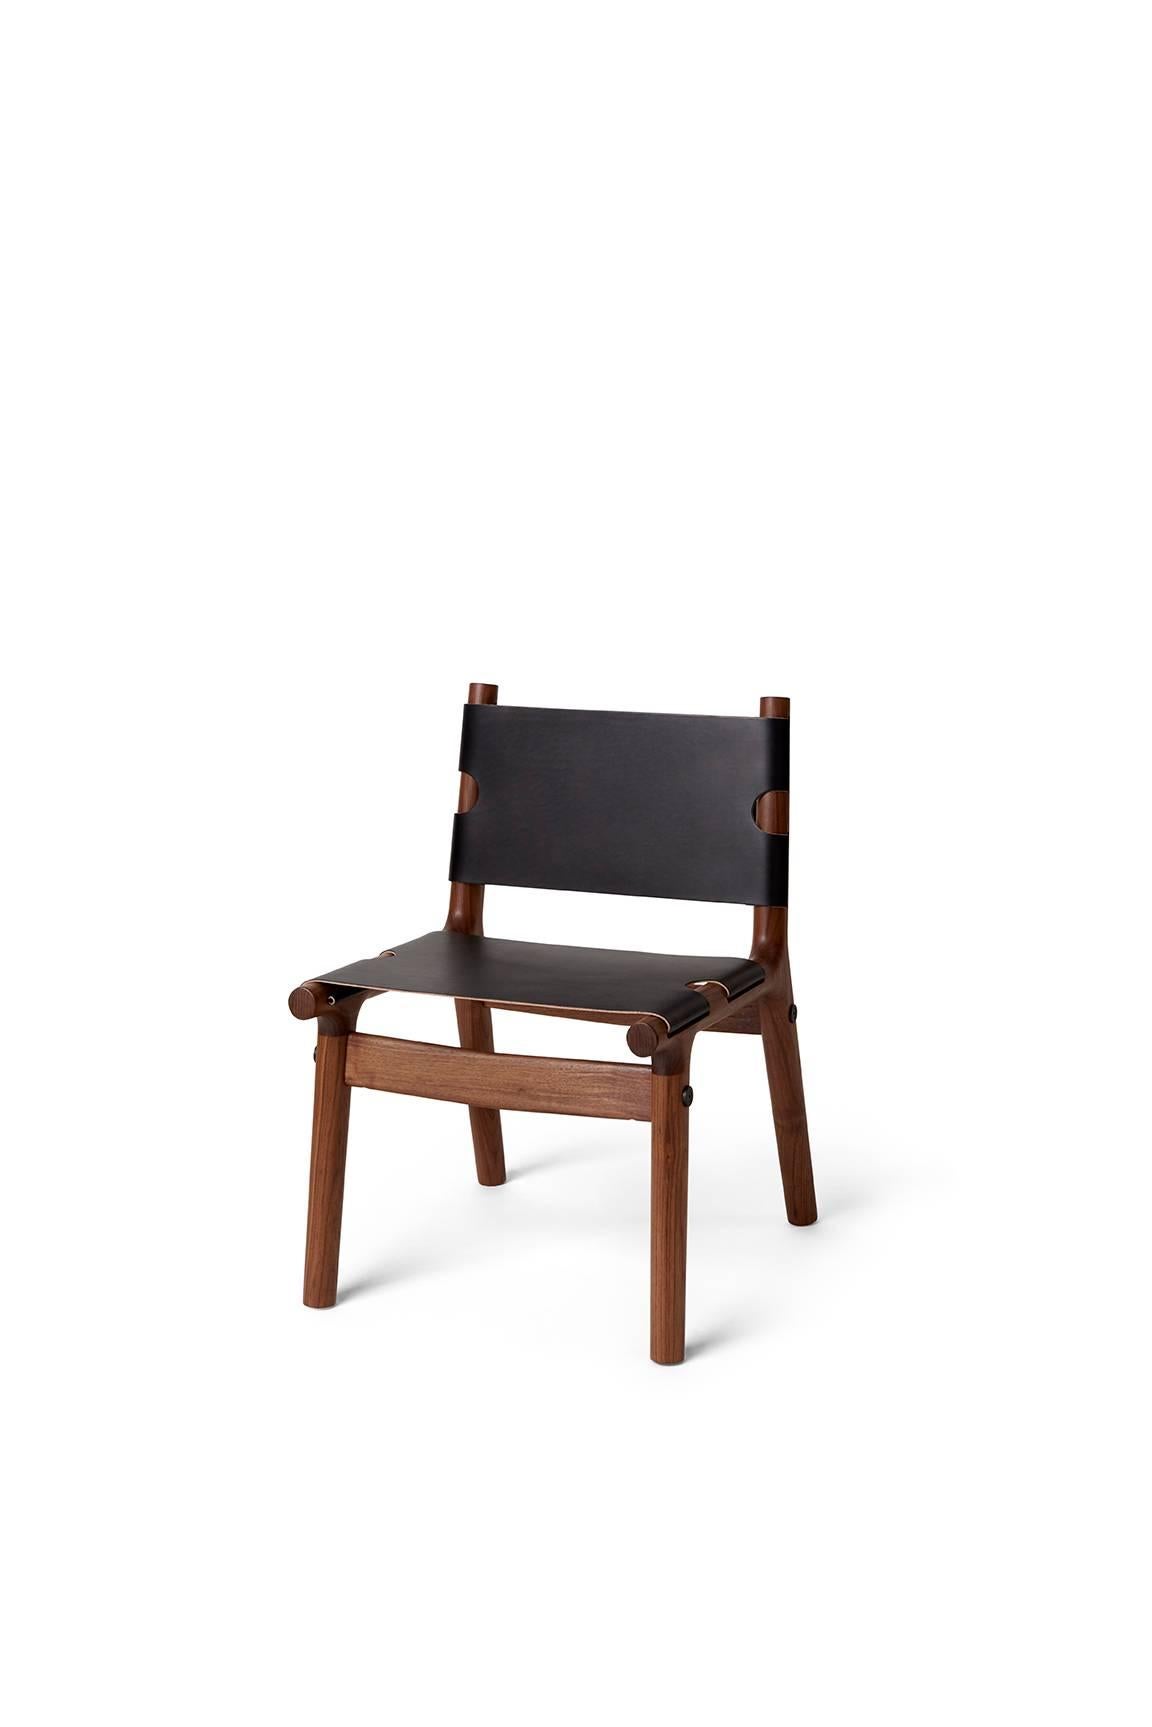 204 Side Chair, Modern Ash Hardwood, Tan Harness Leather, and Polished Aluminium In New Condition For Sale In Brooklyn, NY